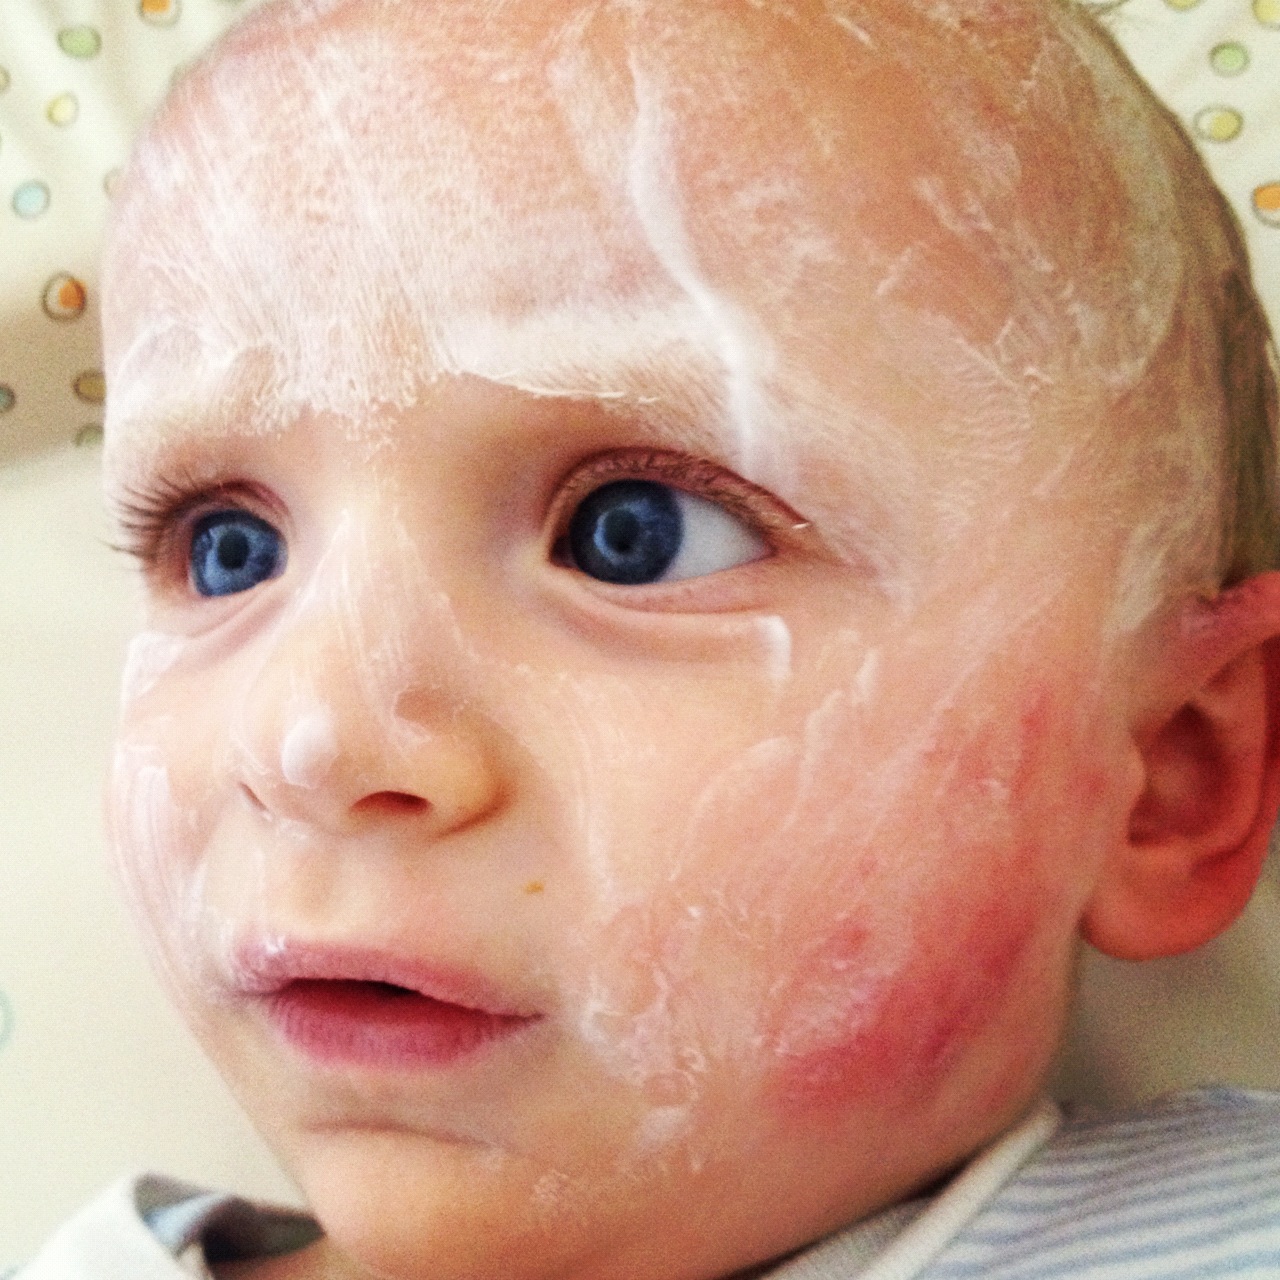 Managing allergies and eczema in cold weather - cold weather can exacerbate eczema symptoms, resulting in dry and irritated skin! Here are my top tips on how to improve and prevent symptoms! (Callum with severe eczema on cheeks) www.intolerantgourmand.com